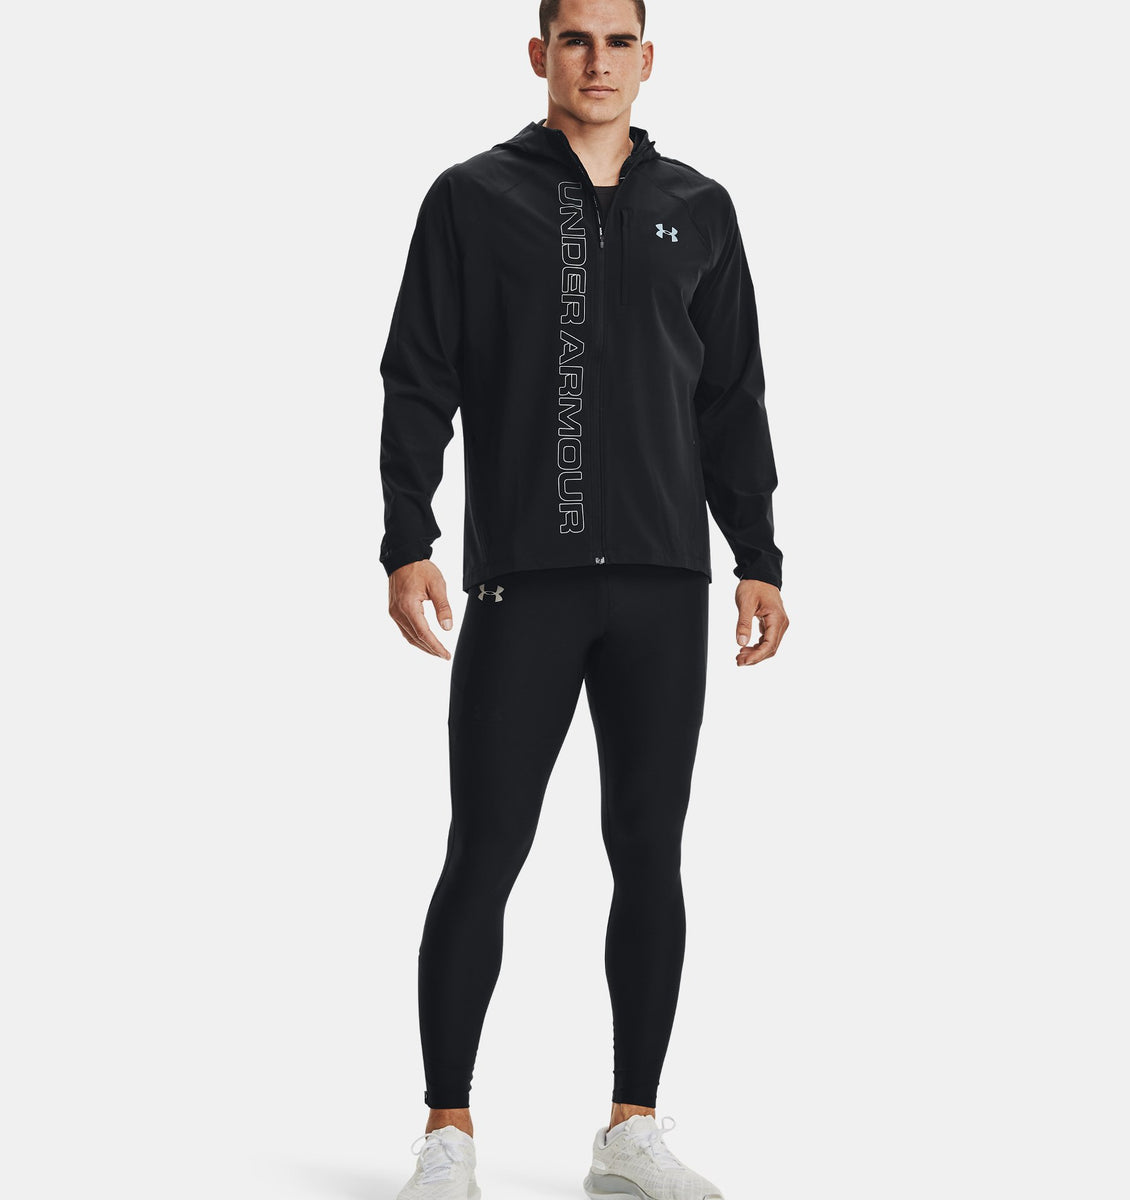 Under Armour Outrun The Storm Women's Running Jacket - Black